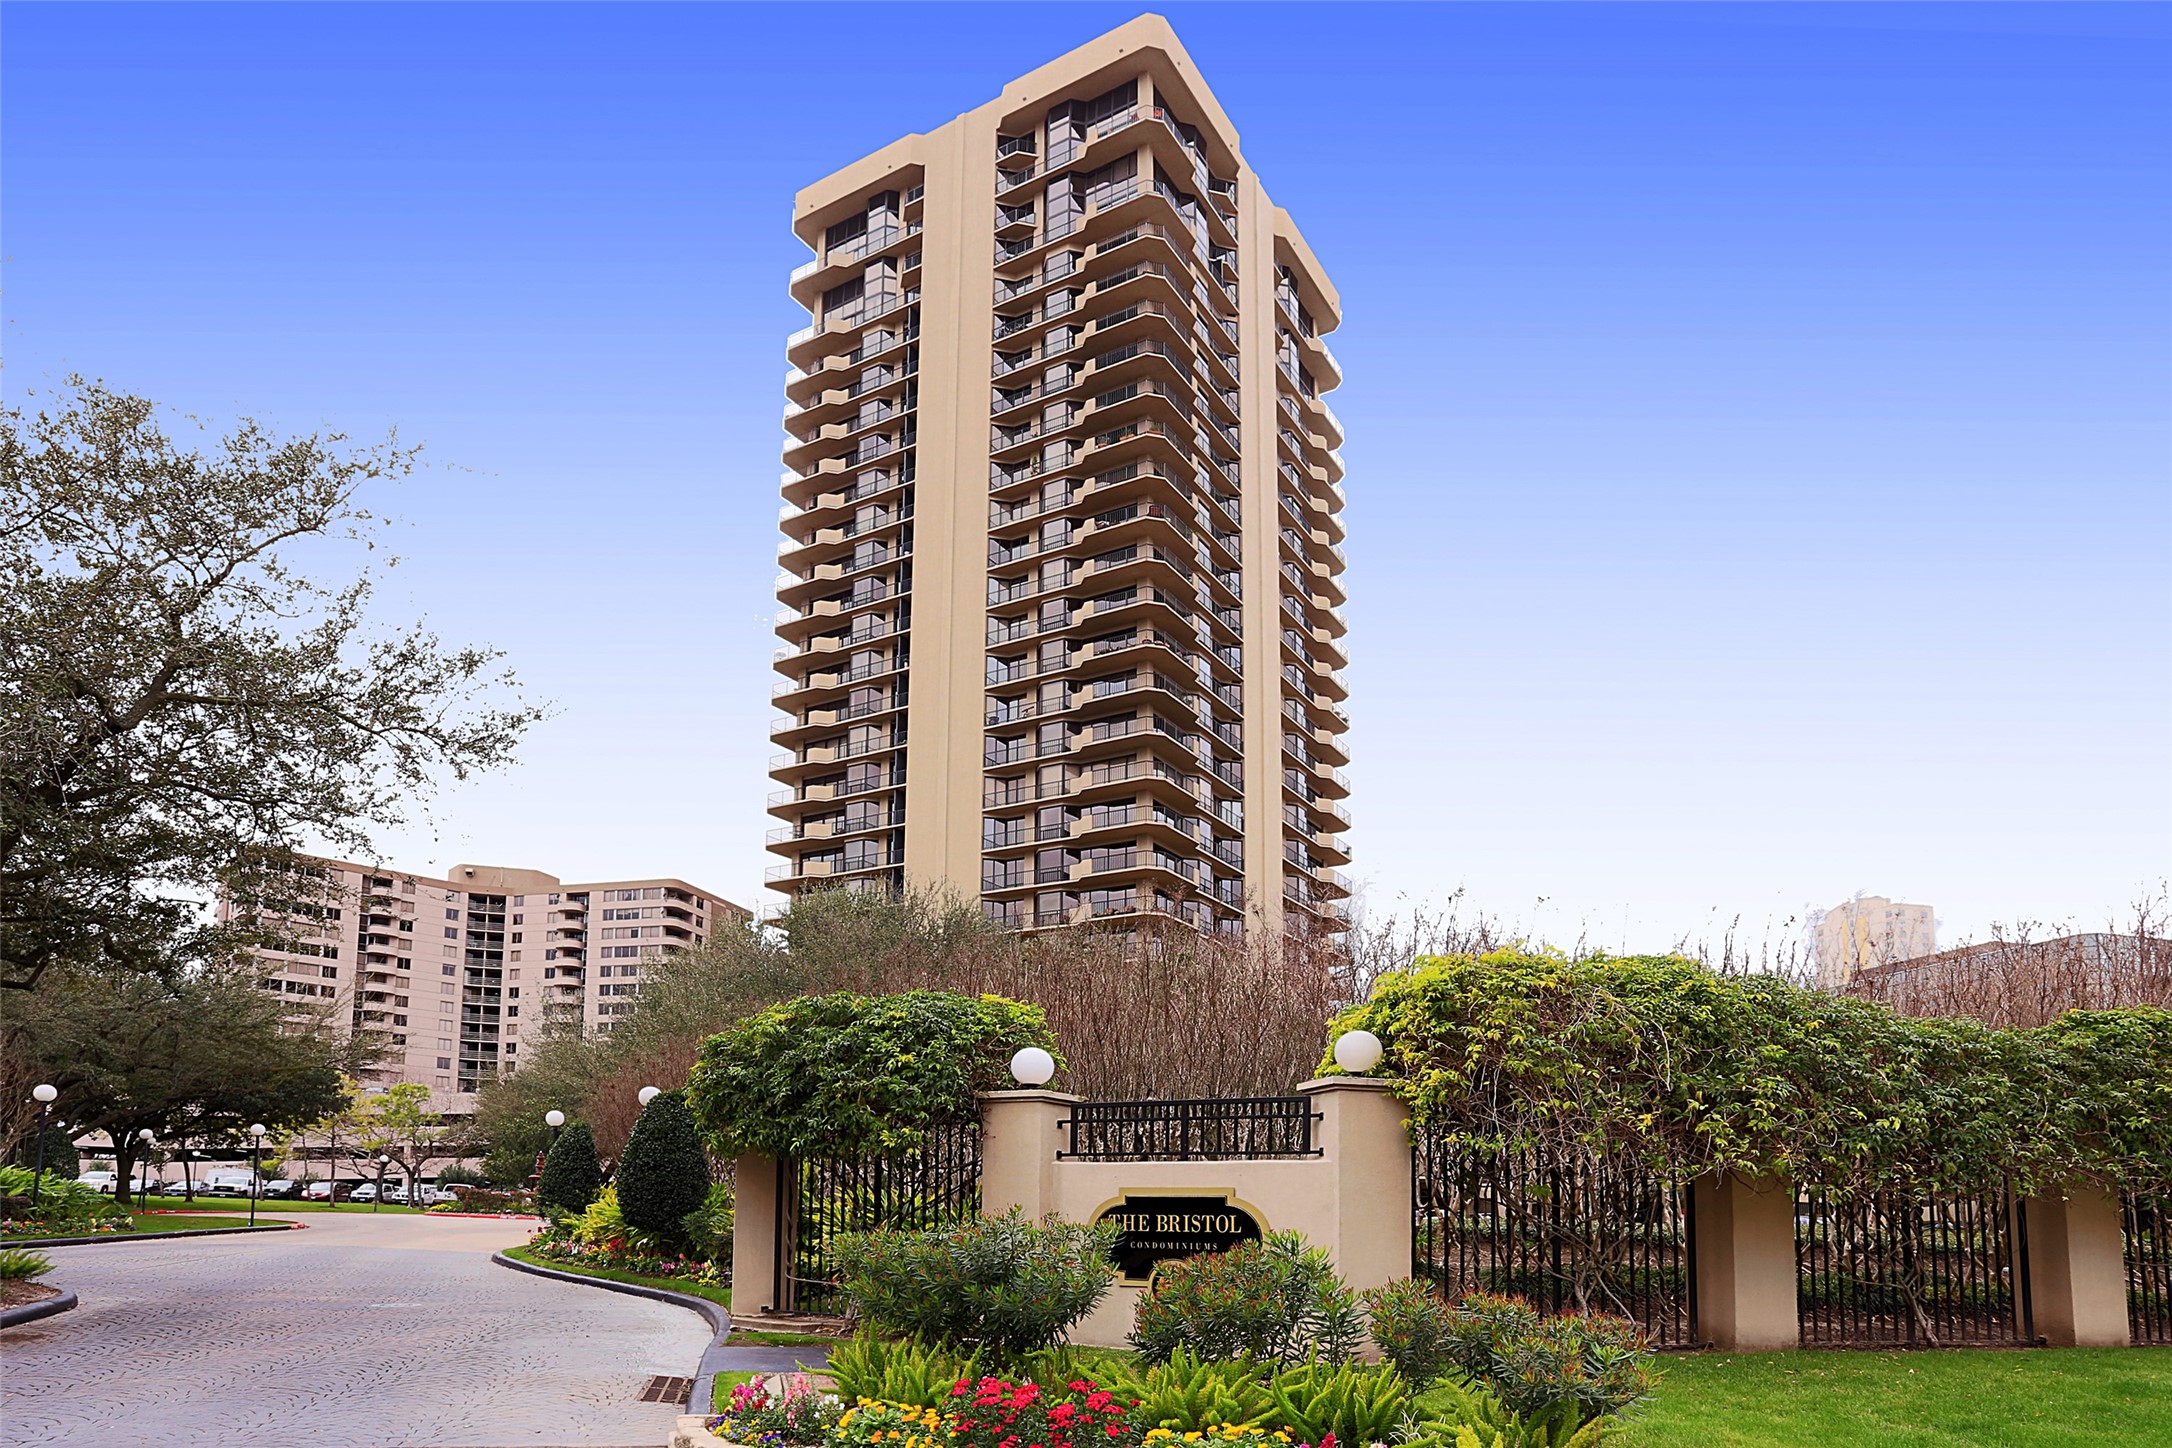 The Bristol is a full service, 27 story condominium in the Galleria area, within walking distance to Houston's finest shopping and great restaurants. Convenient, easy, and fast access to both Highway 59 and Loop 610.